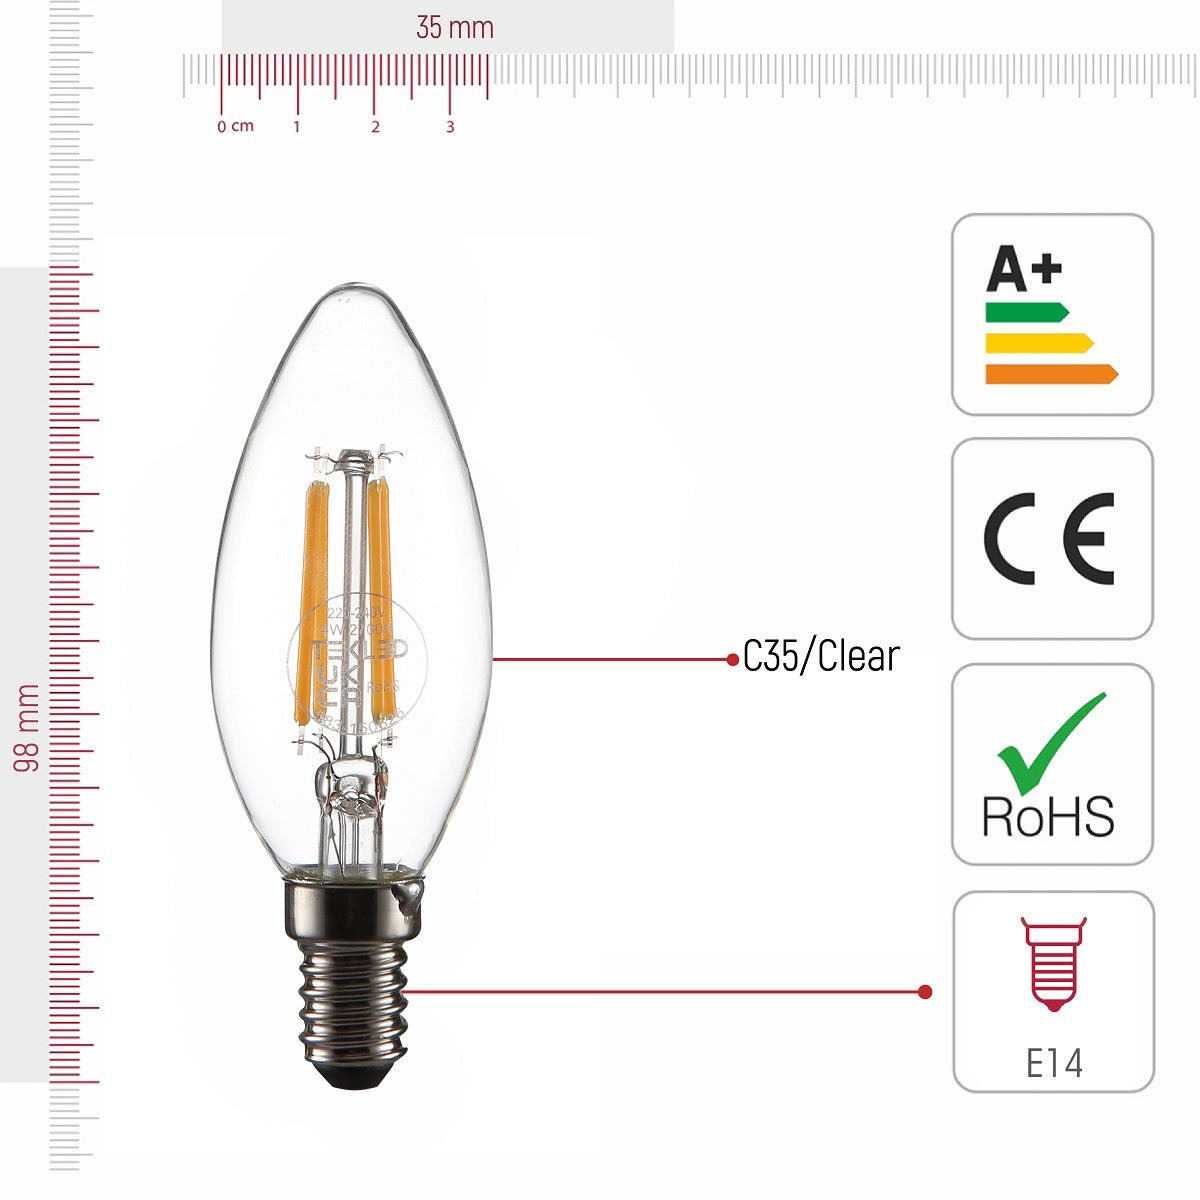 Visual representation of product measurement and certification of led dimmable filament bulb candle c35 blunt e14 small edison screw 4w 400lm warm white 2700k clear pack of 6